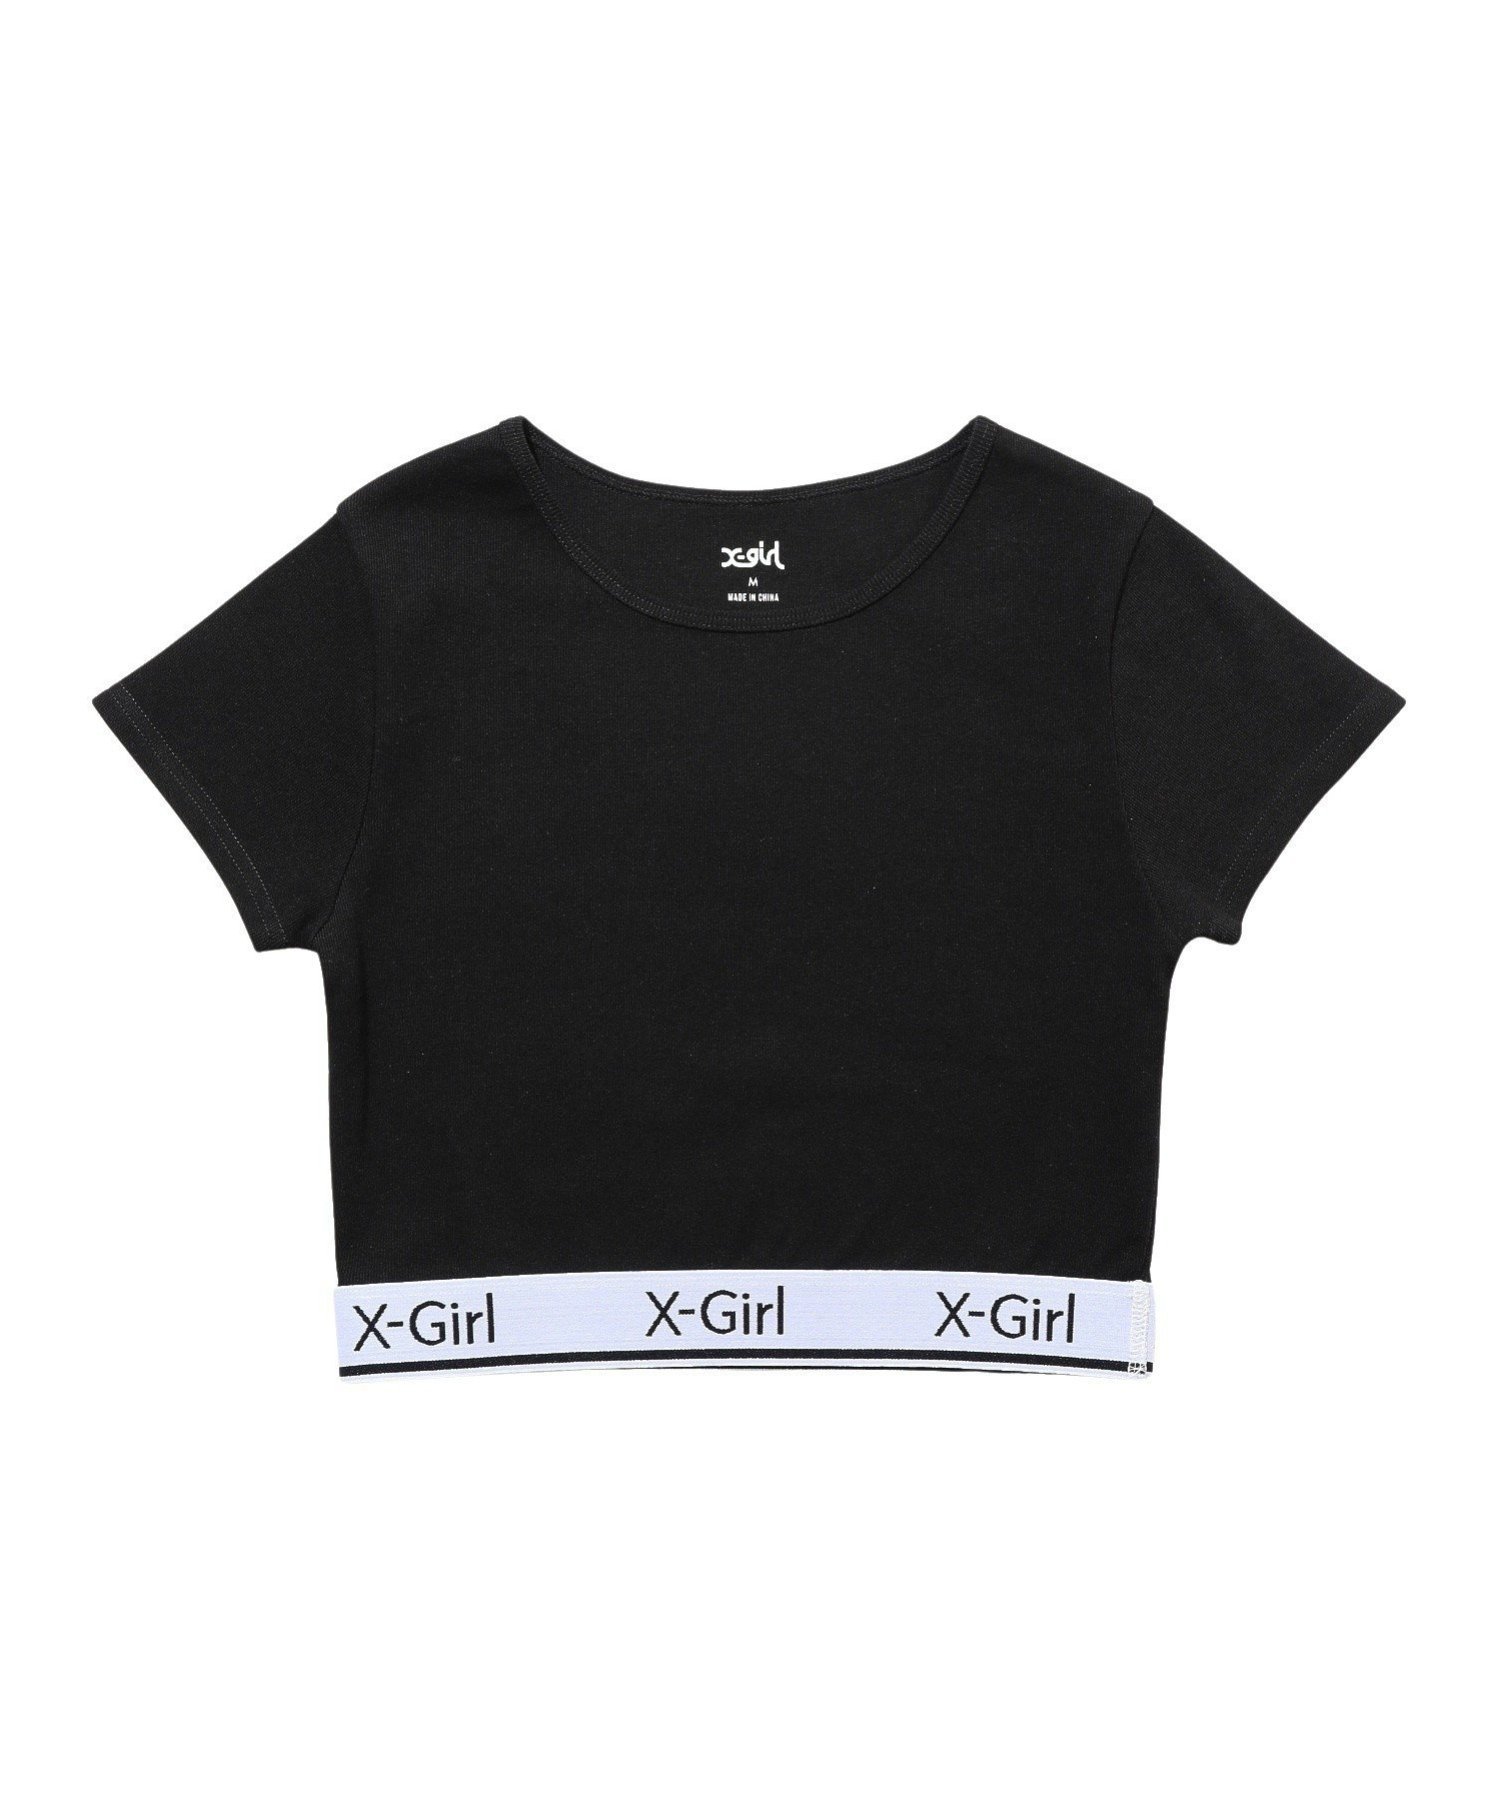 X-girl LOGO AND STRIPE CROPPED S/S TOP トップス X-girl エックスガール トップス カットソー Tシャツ ブラック カーキ ホワイト【送料無料】